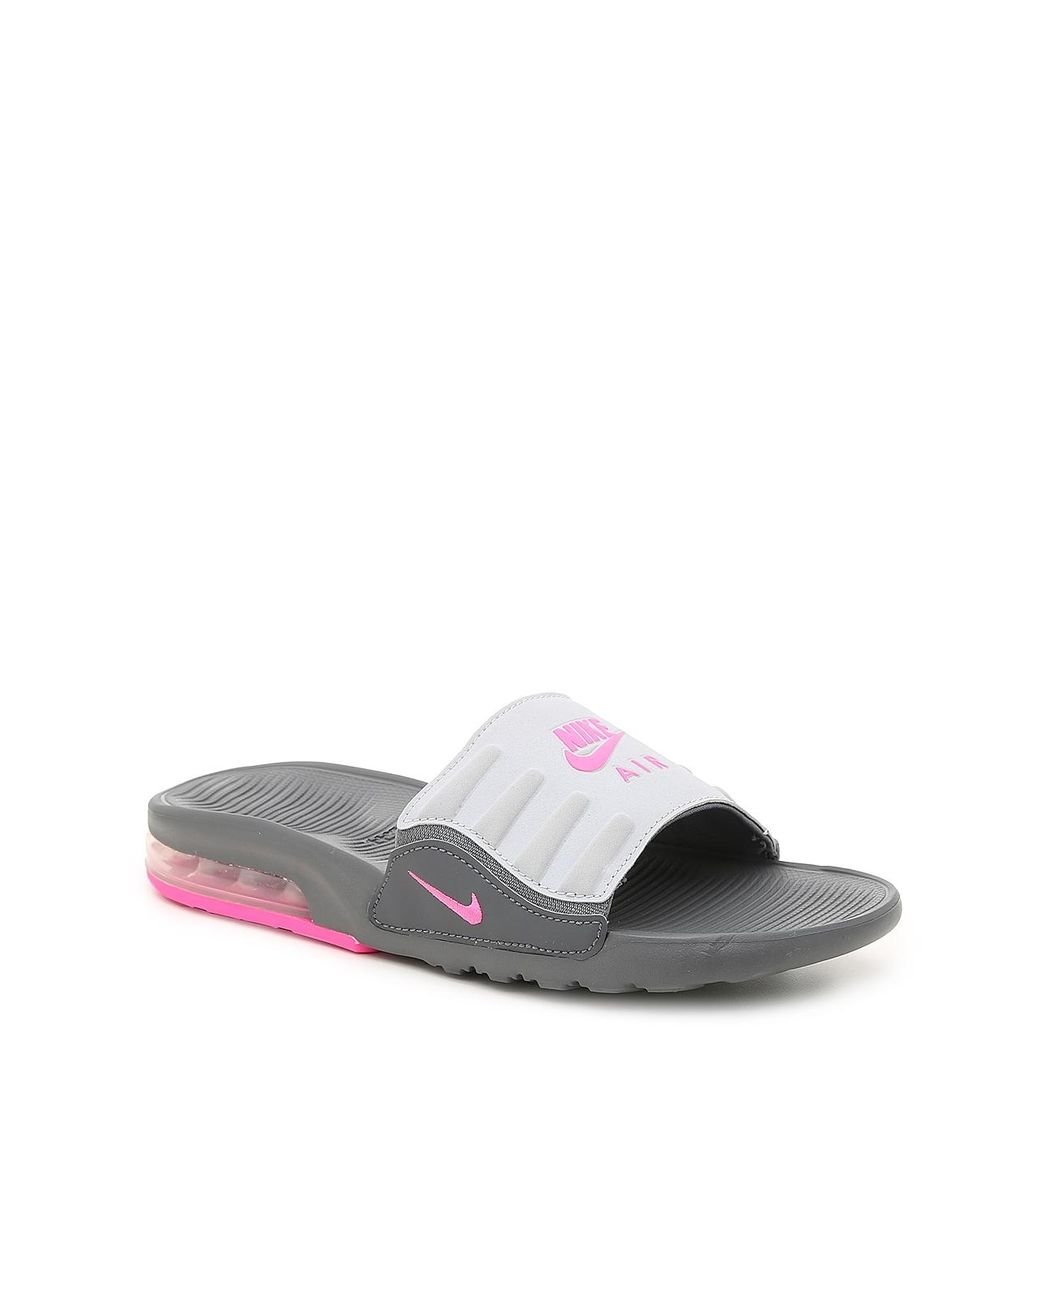 Nike Air Max Camden Slide Sandals in Grey/Pink (Gray) | Lyst